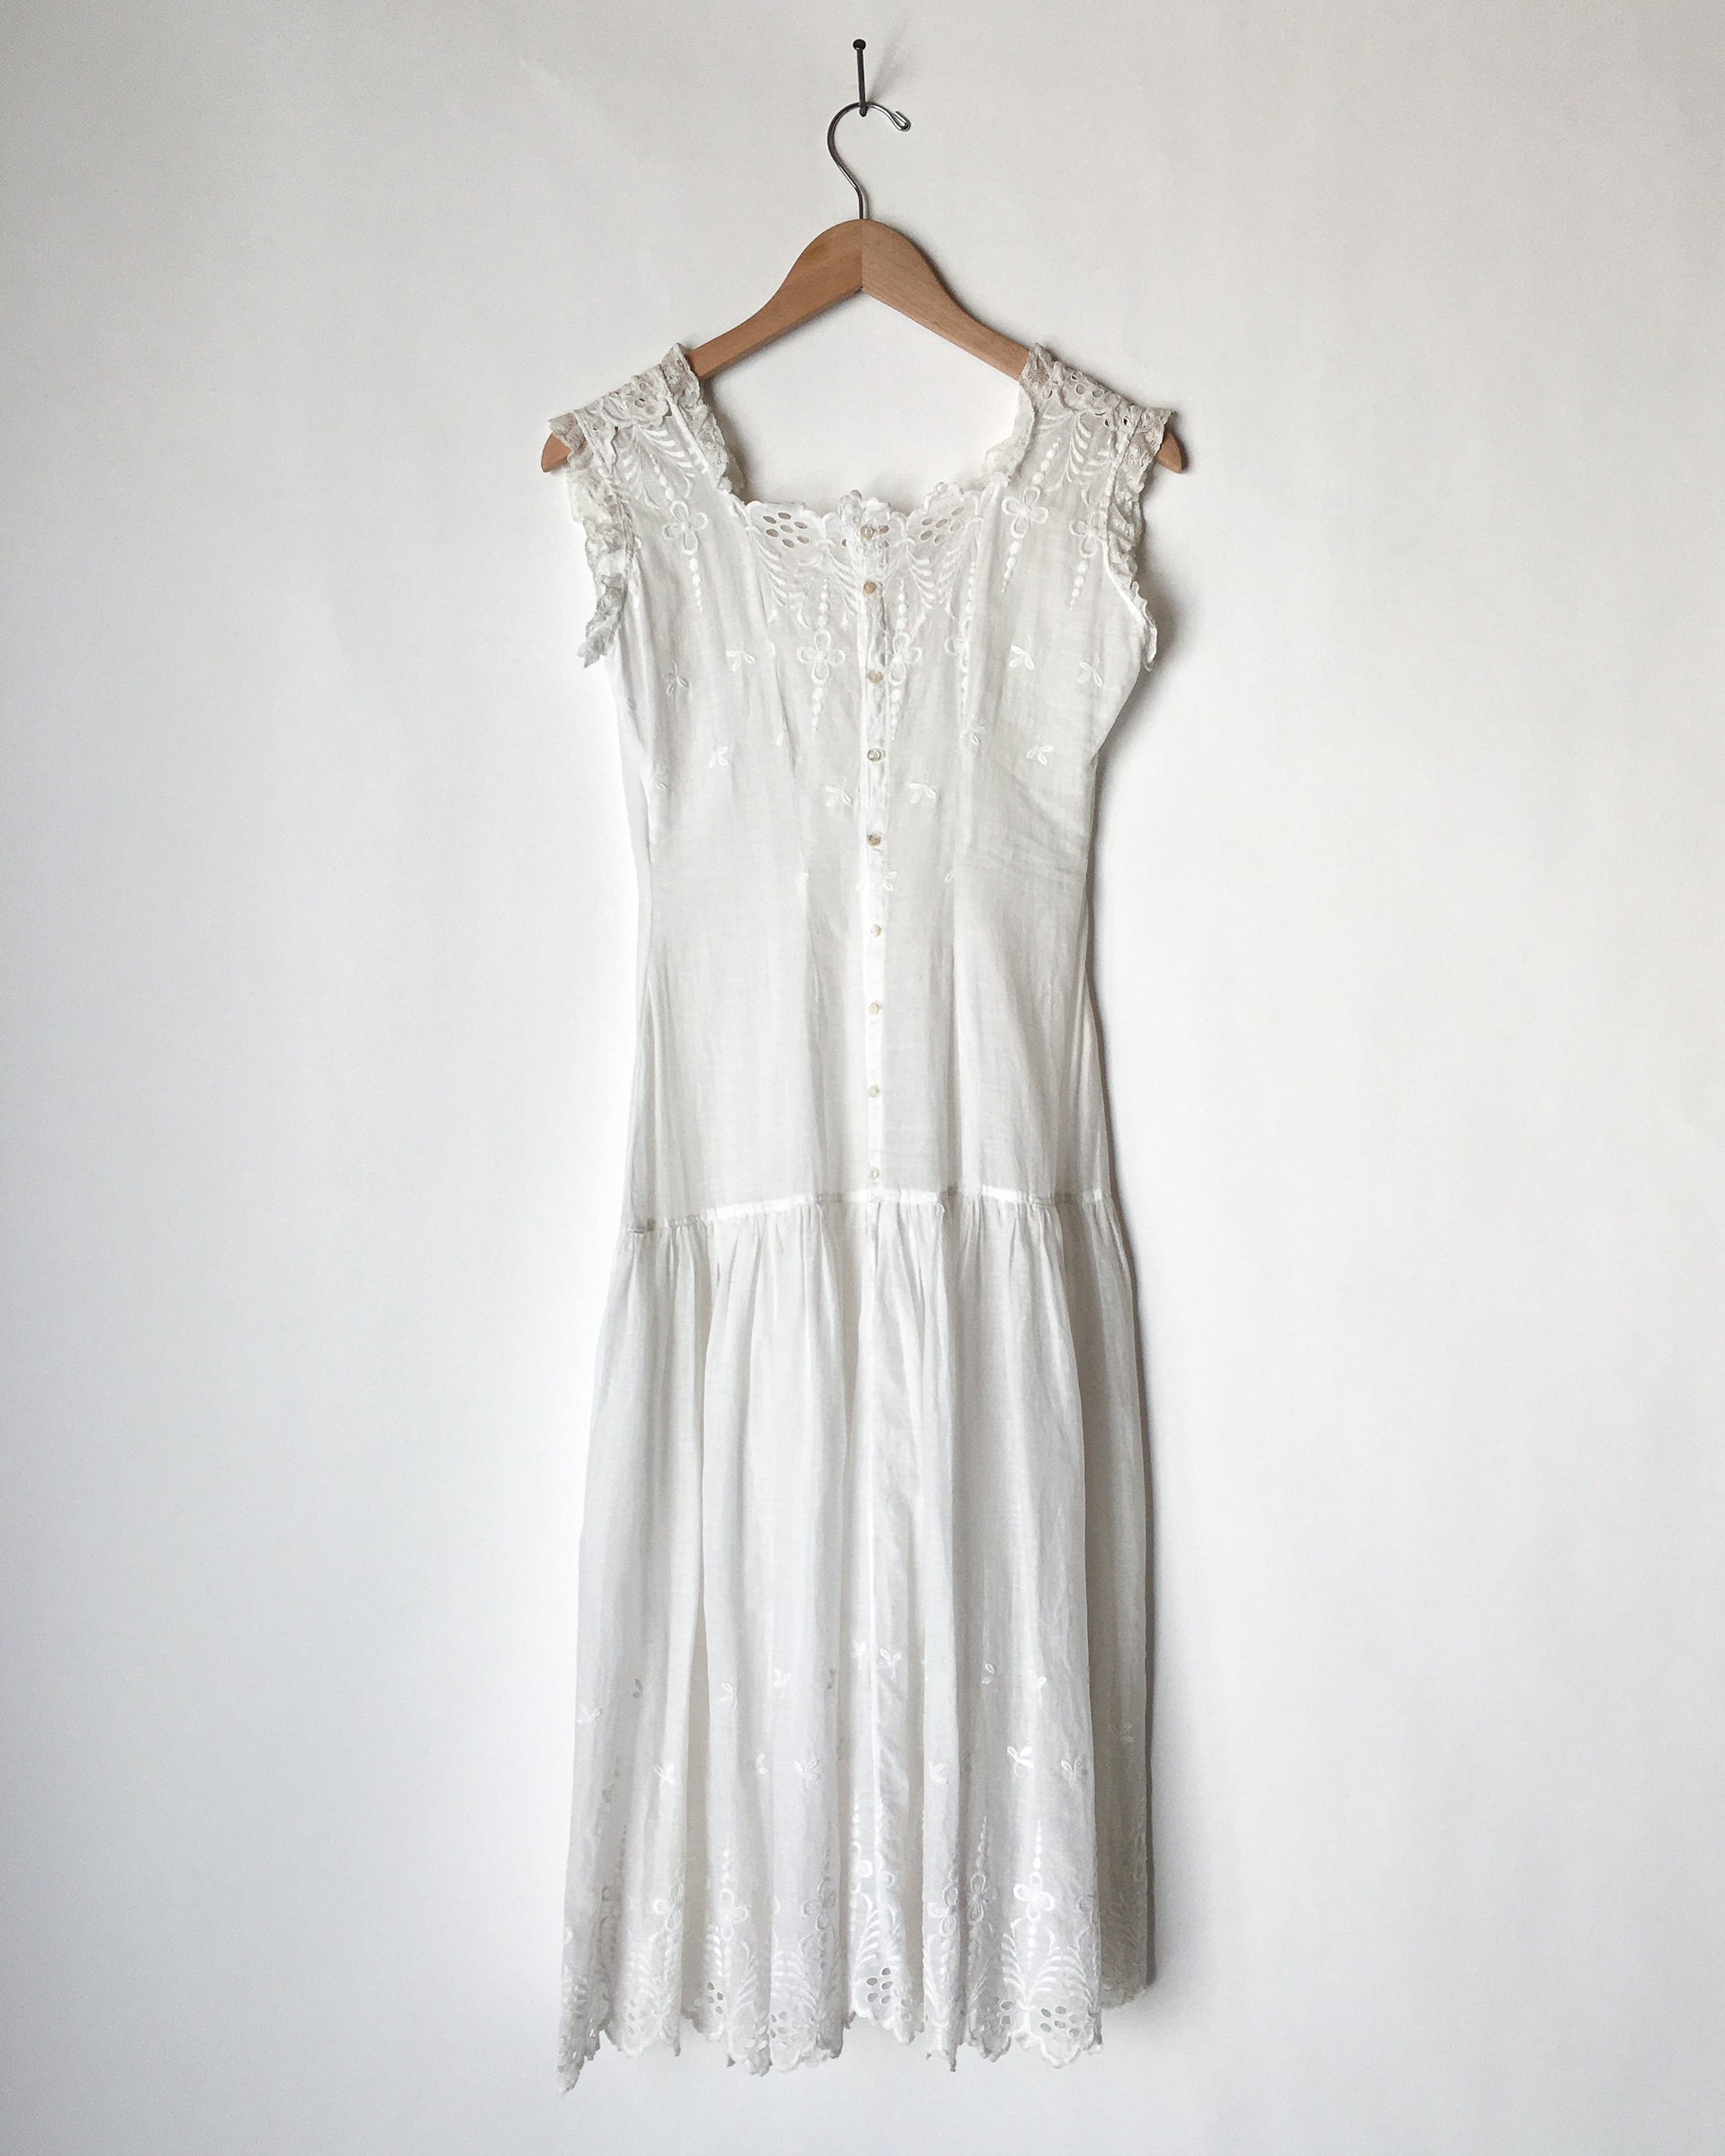 Antique White Cotton Voile Dress – Carny Couture